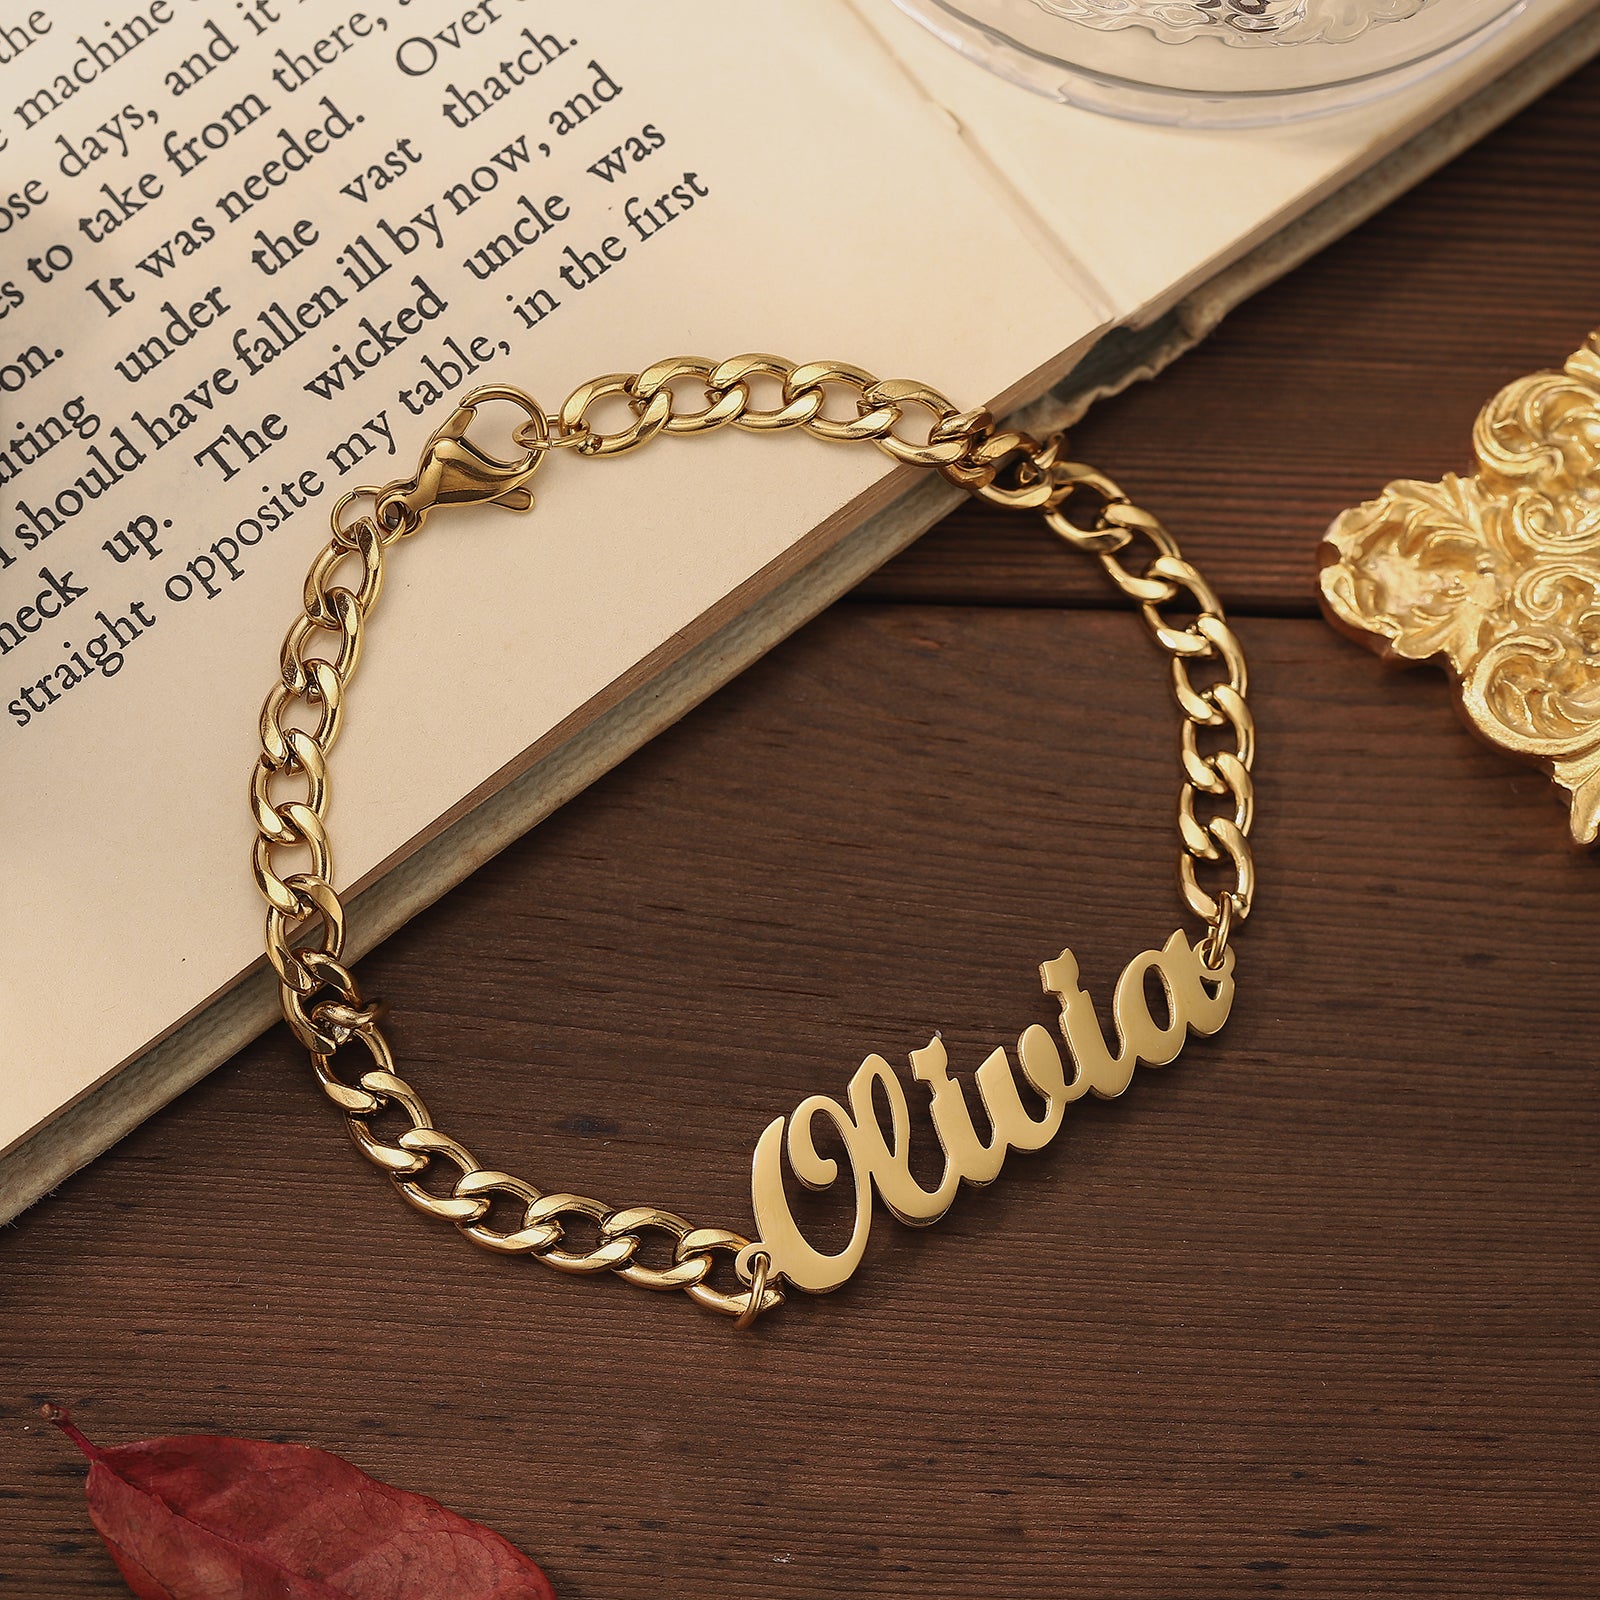 Personalized Name Chain Bracelet